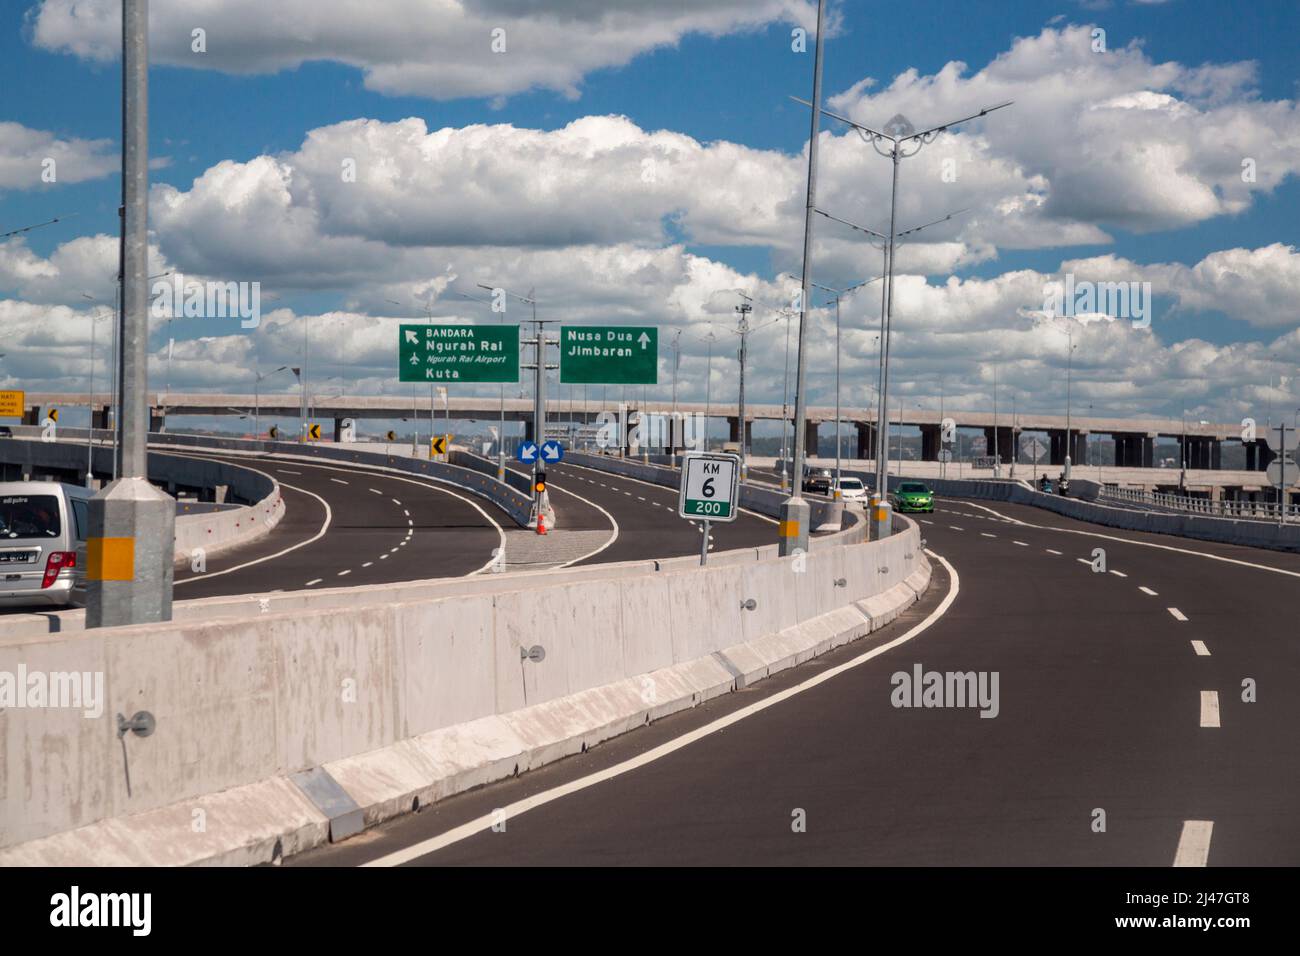 Bali, Indonesia.  Expressway, Super Highway, Modern Roadway.  Sign to Airport.  Driving on the Left. Stock Photo